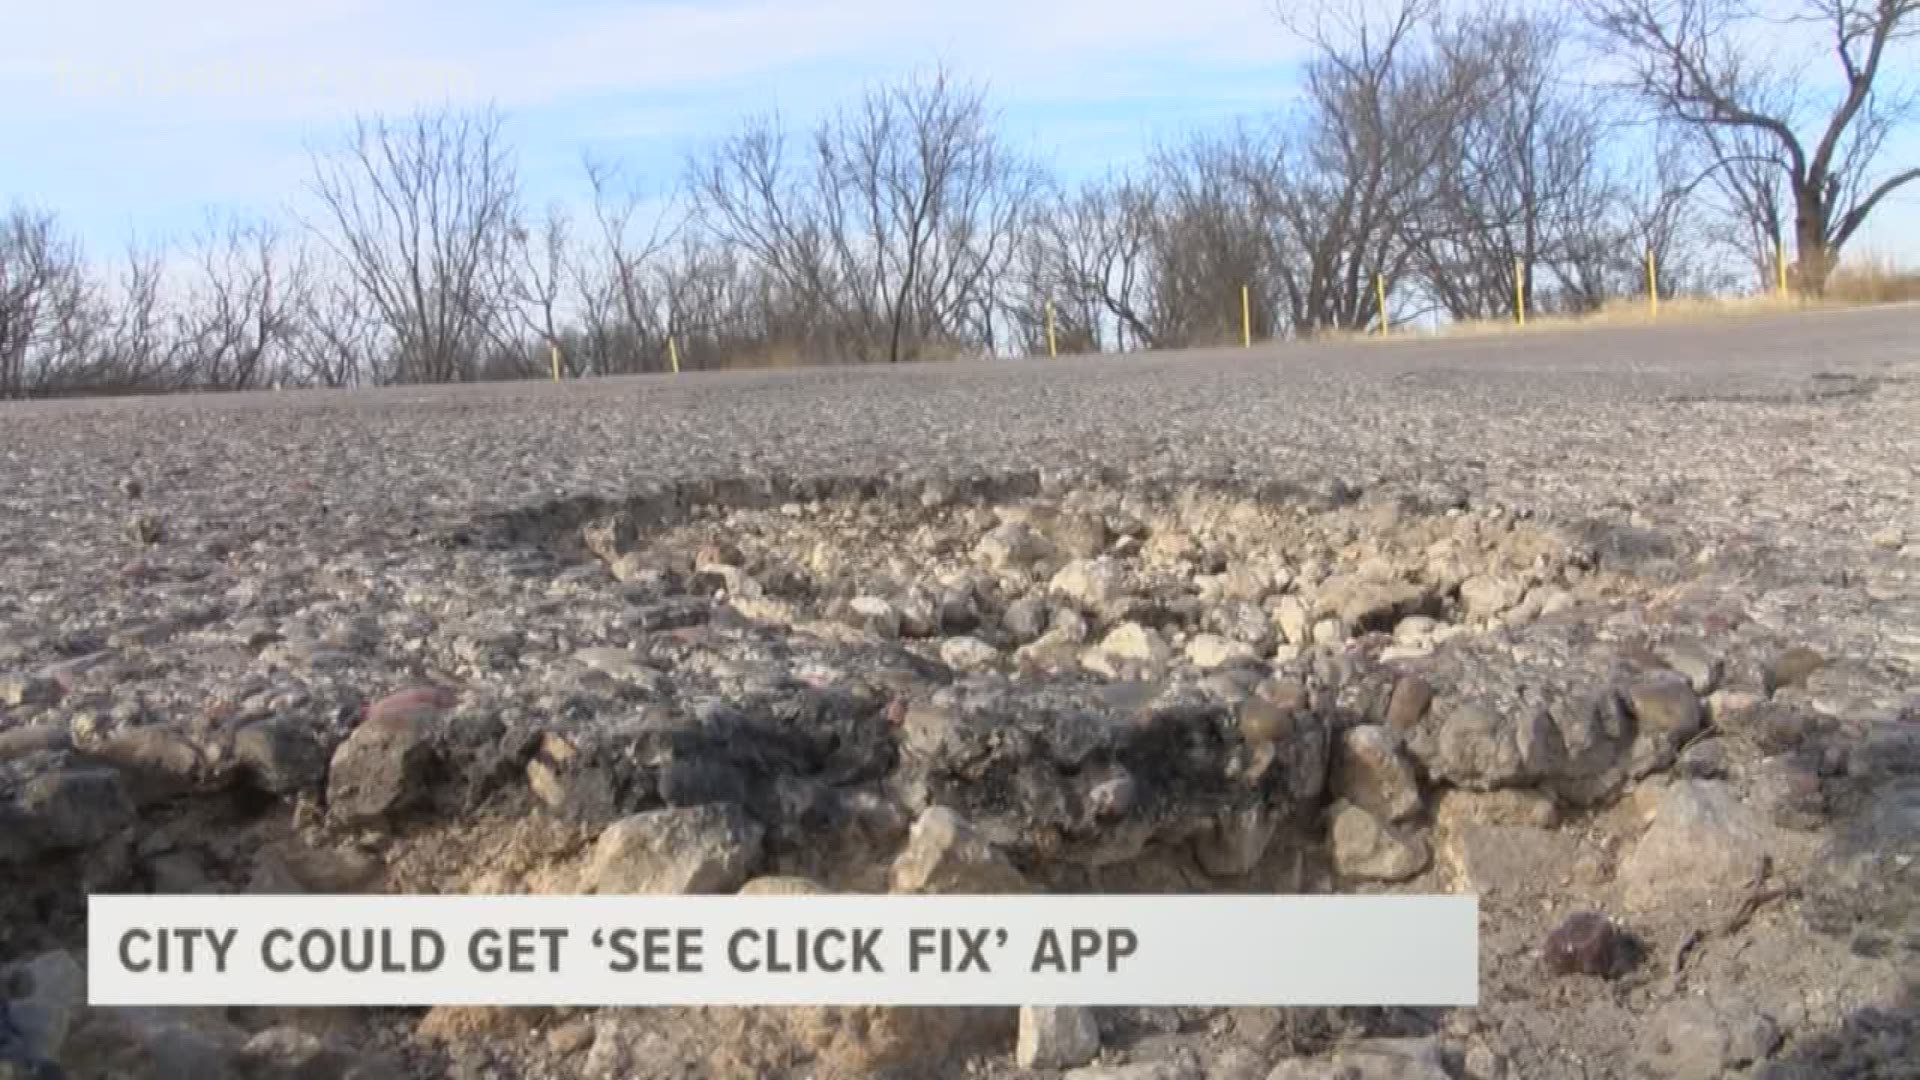 New road app where you can report issues.